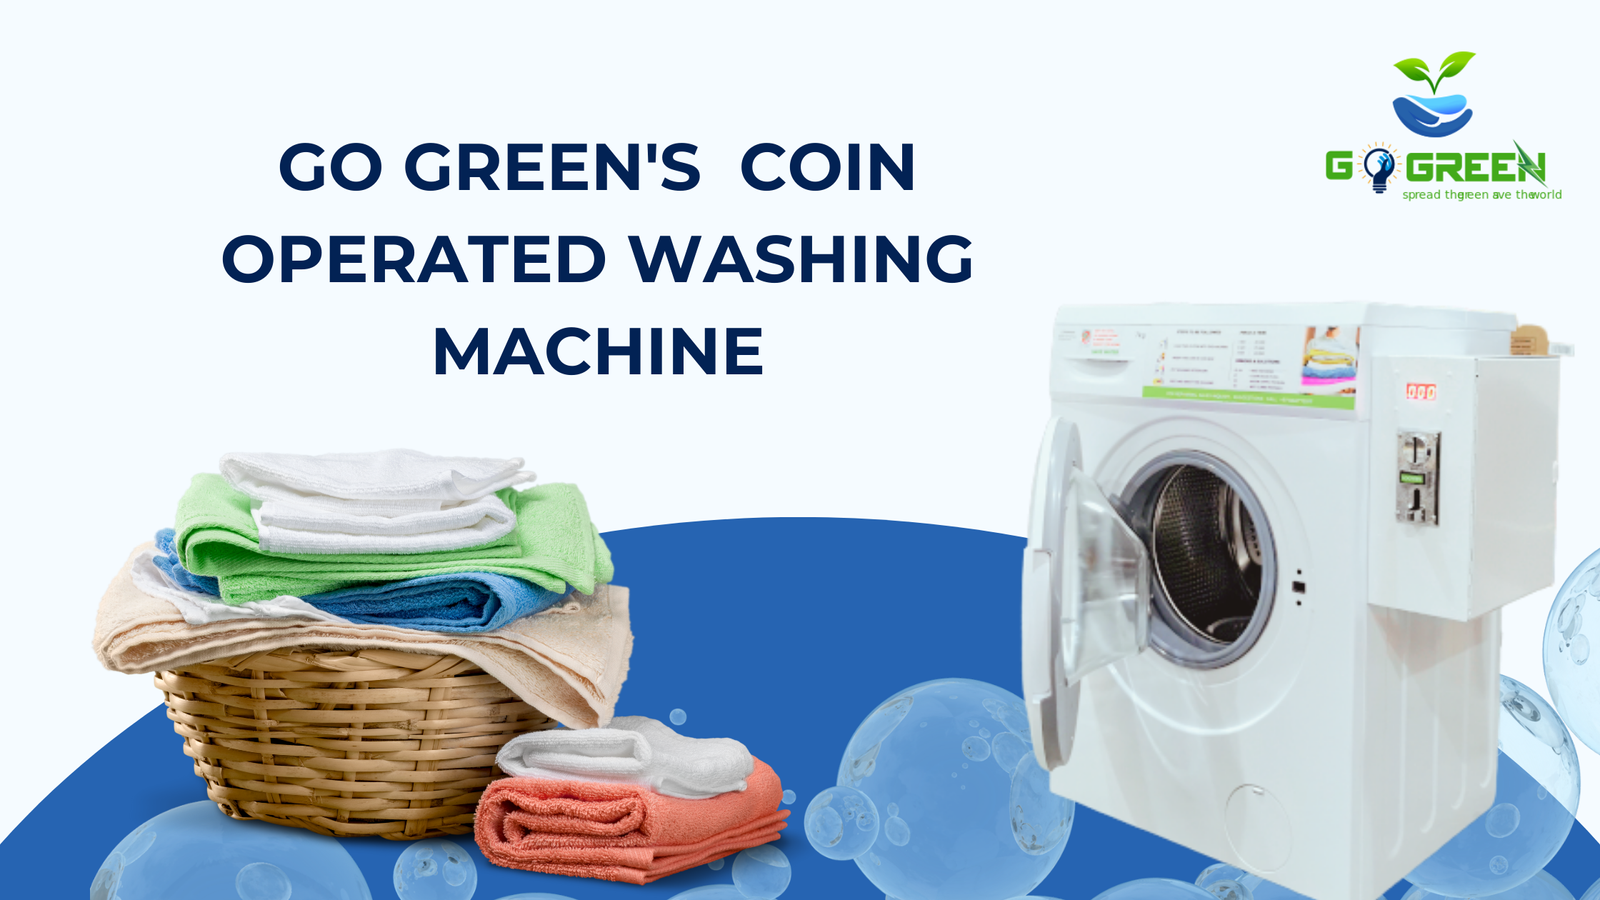 Entrepreneurial Opportunities: Starting a Coin-Operated Laundry Business in Dubai